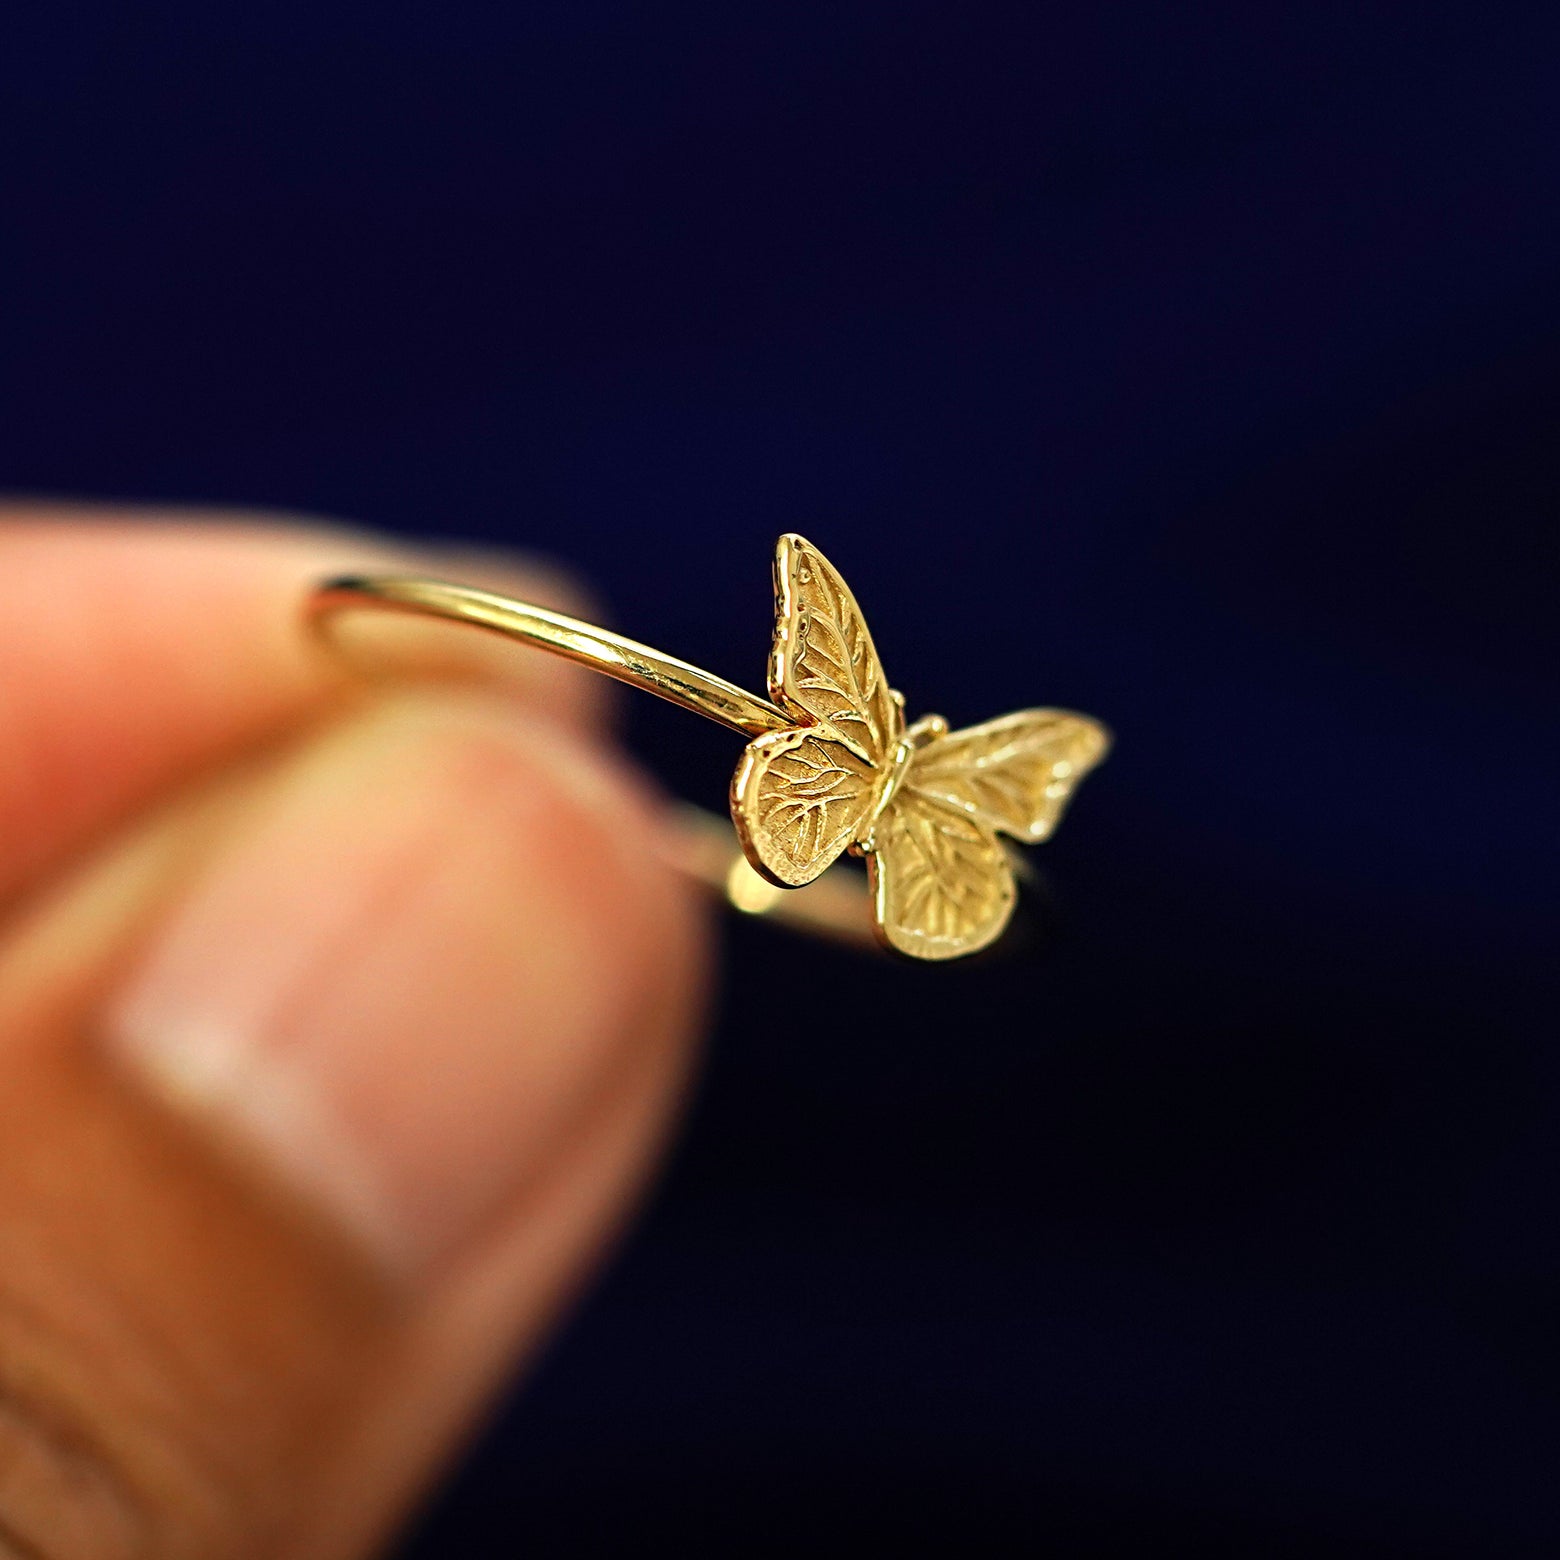 A model holding a Butterfly Ring tilted to show the side of the ring